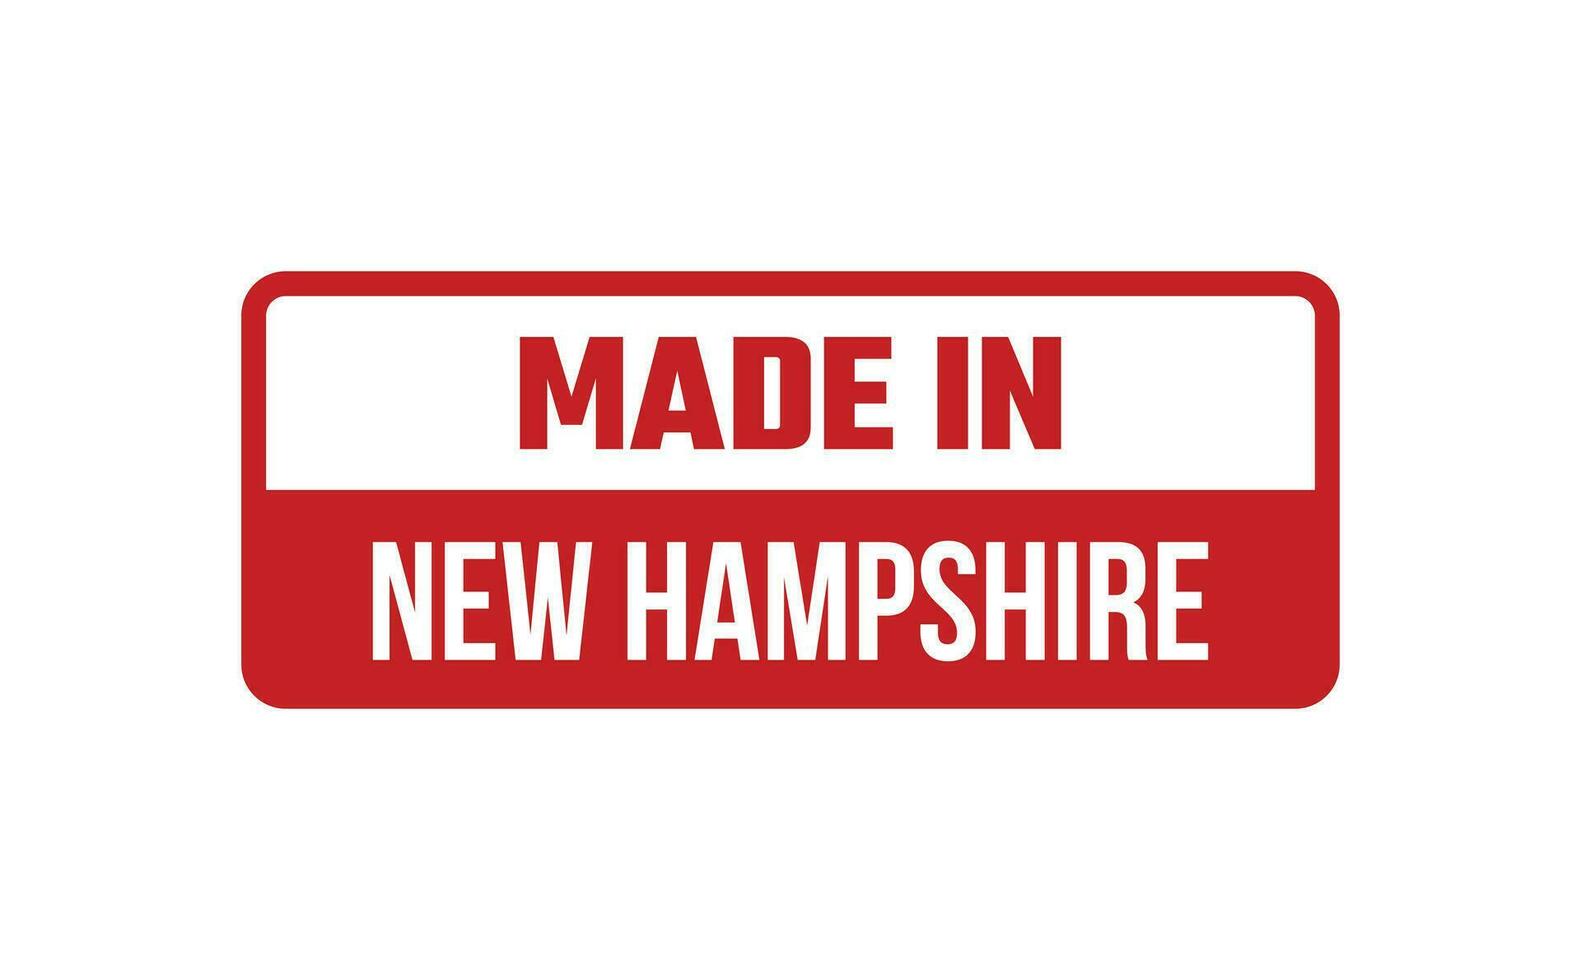 Made In New Hampshire Rubber Stamp vector